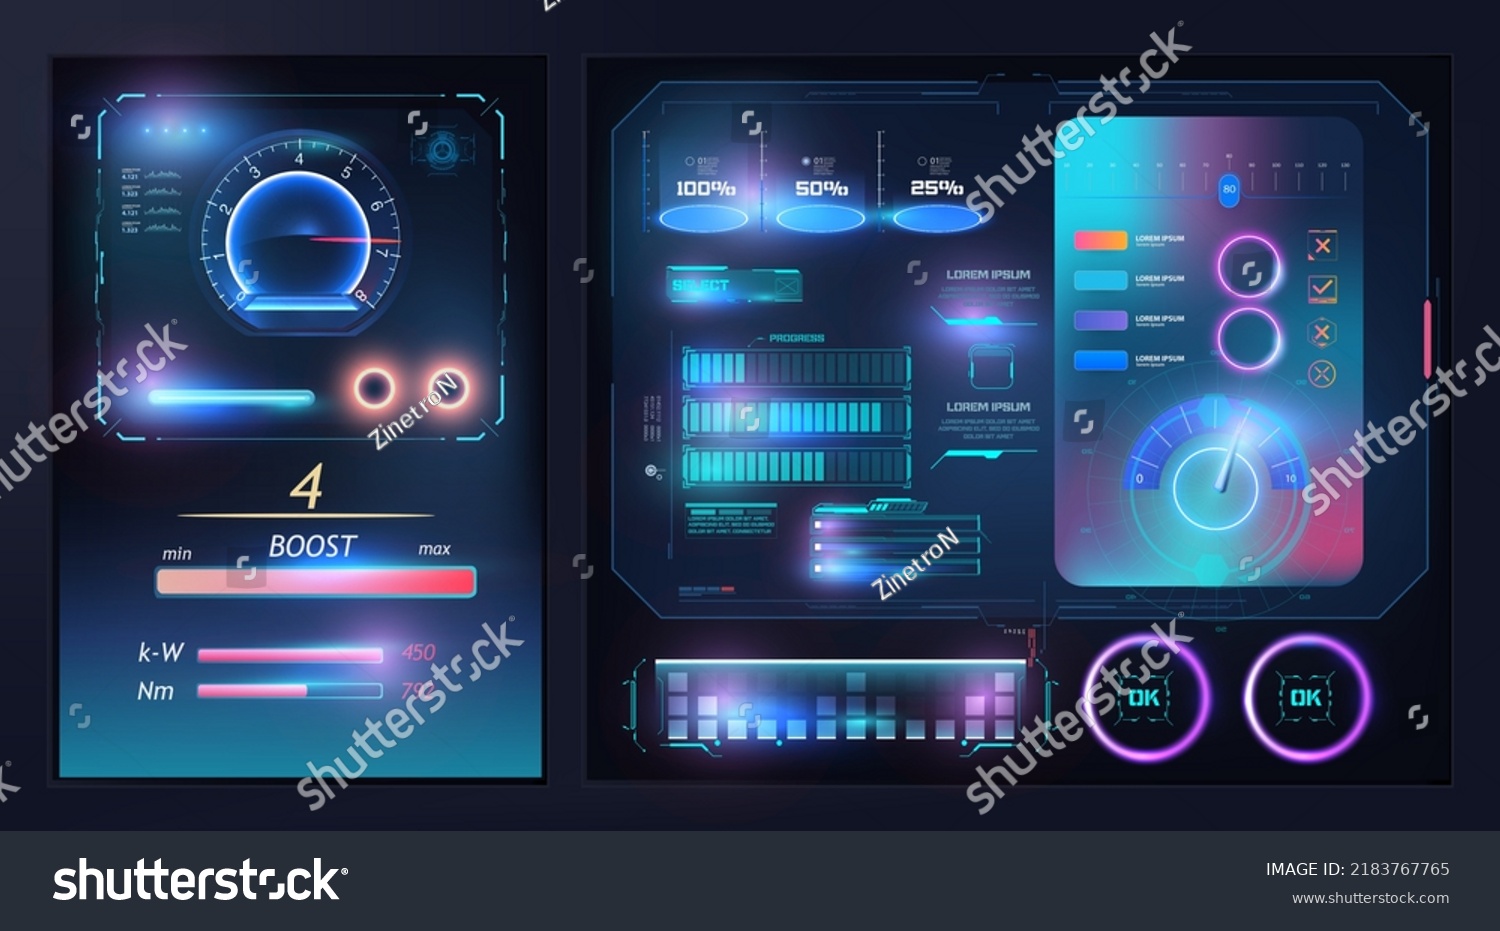 SVG of HUD, UI, GUI Futuristic User Interface. Dashboard, Scanning System infographic elements like scanning graph or waves. Cyberpunk graphs. Display with data for computing, virtual game. Blue neon color svg